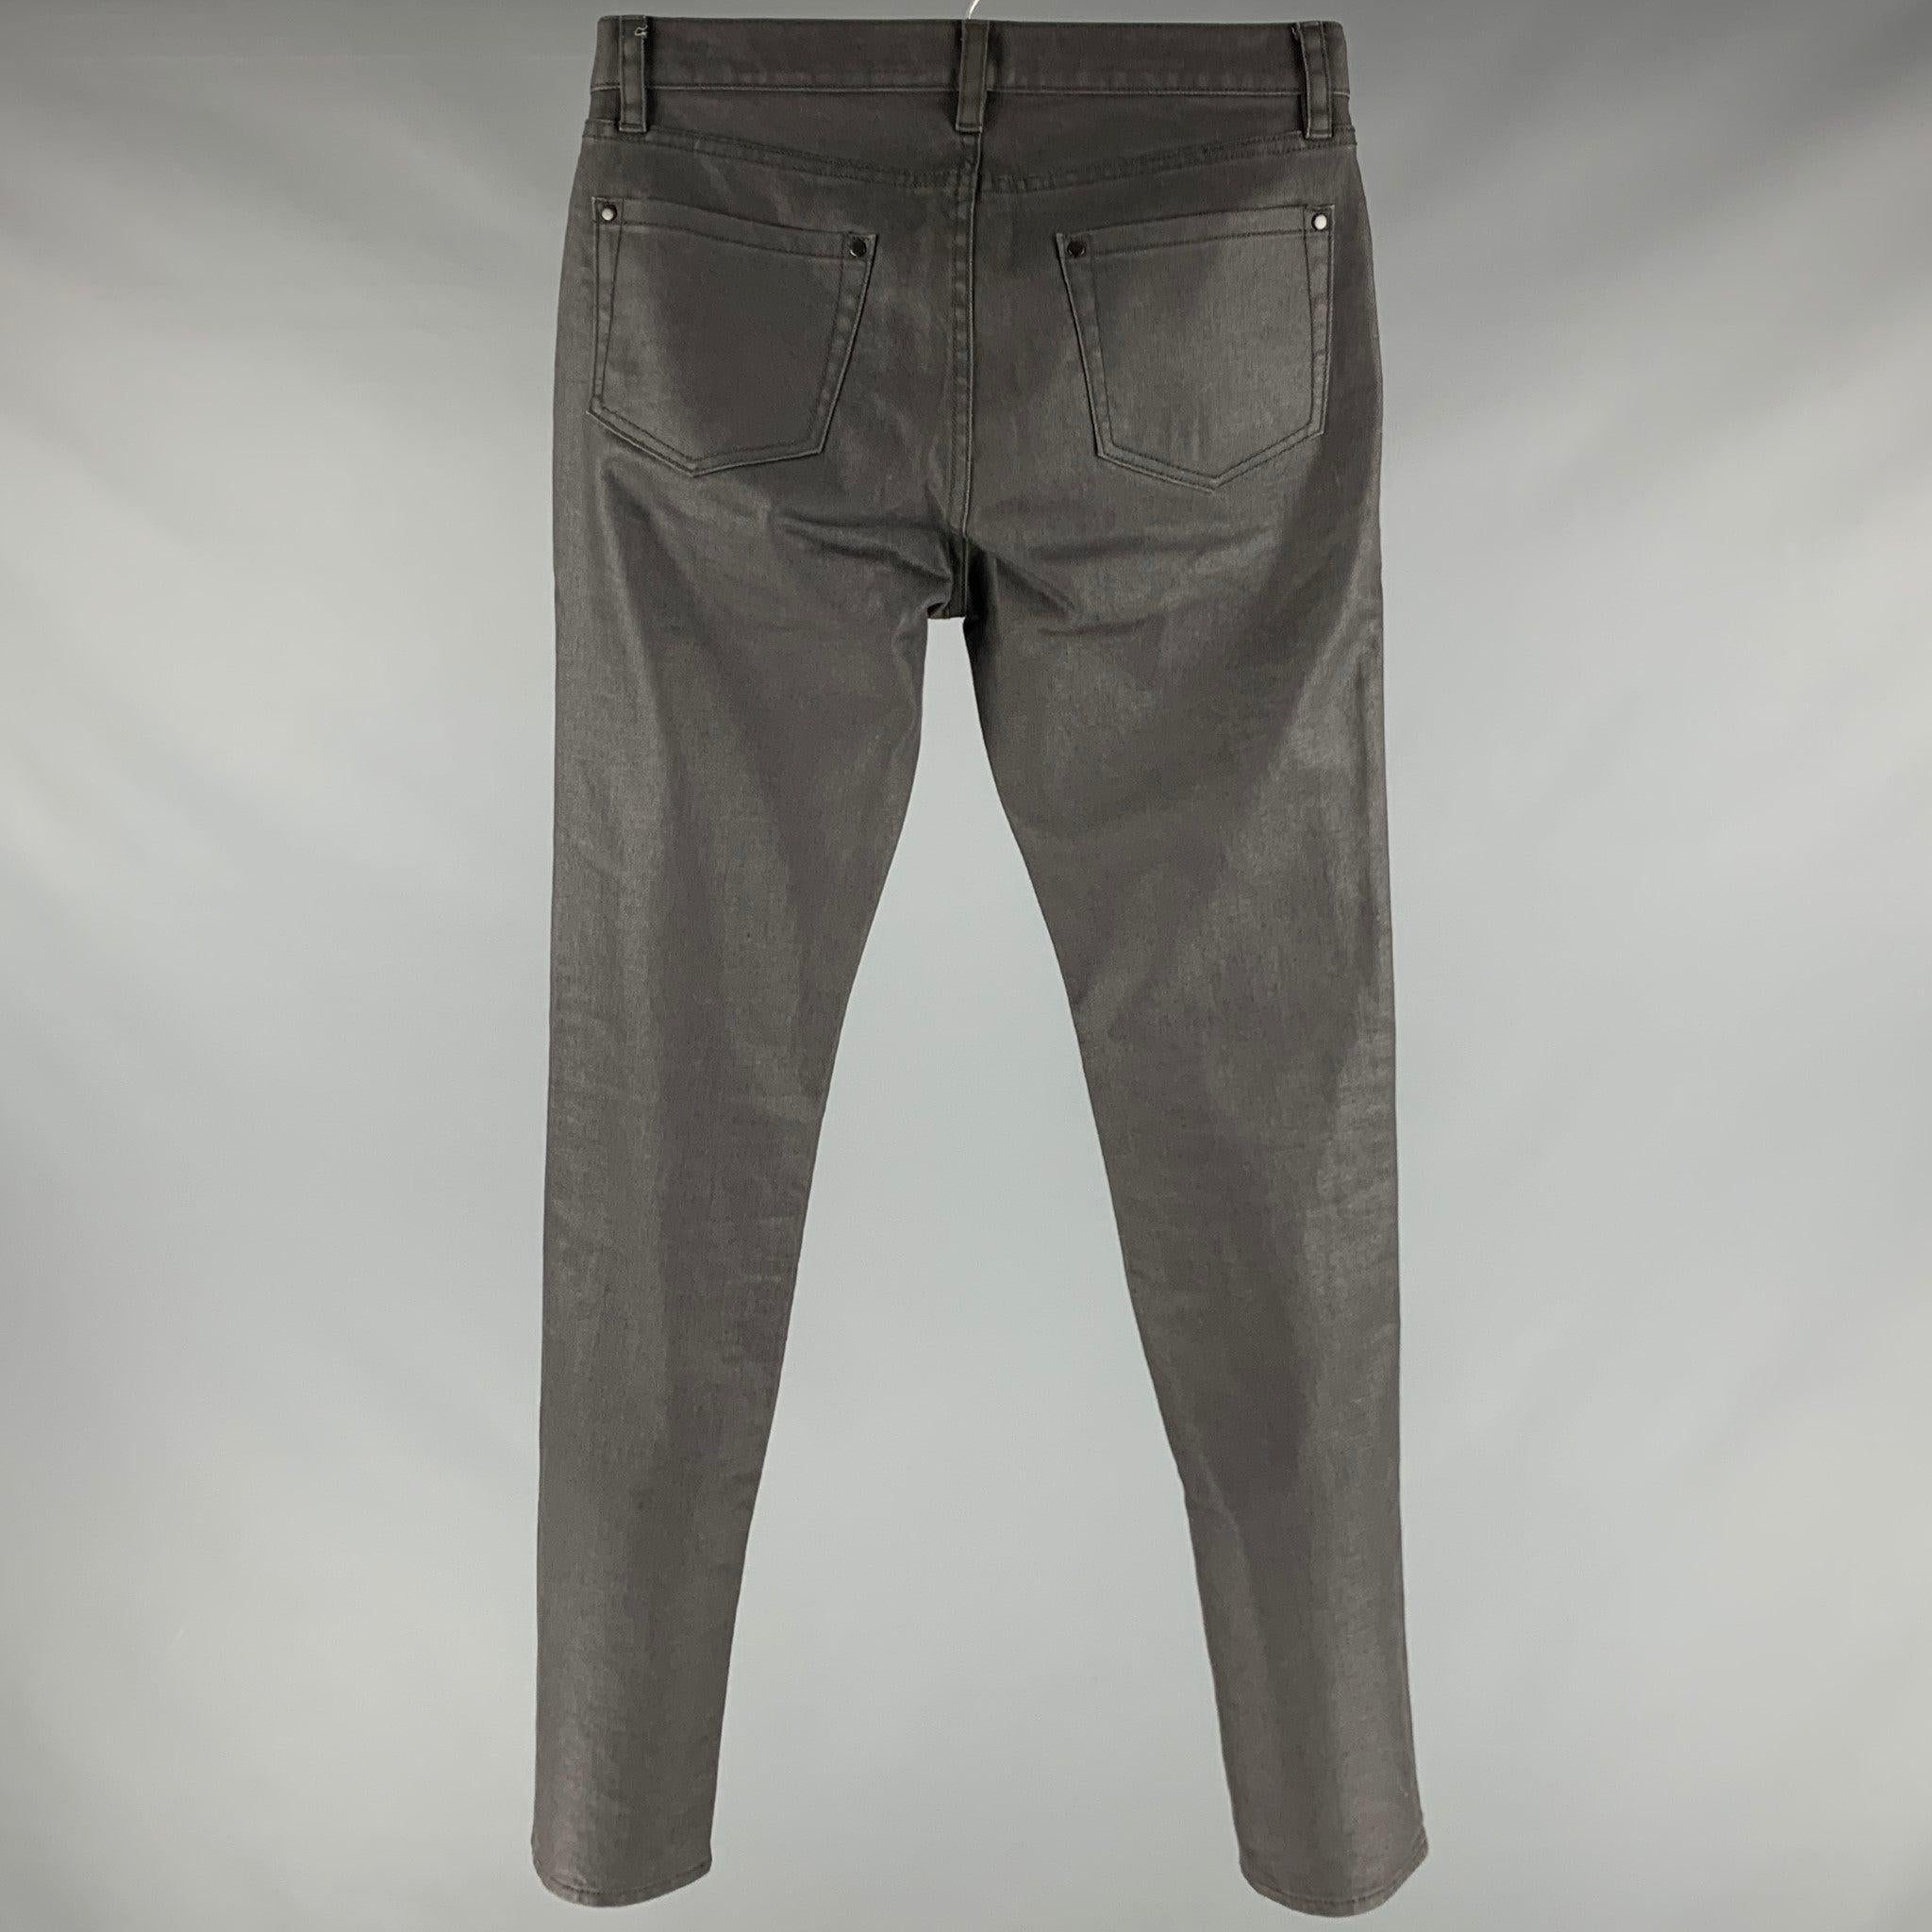 JOHN VARVATOS jeans
in a
grey cotton blend fabric featuring silver tone hardware, five pockets style, and zip fly closure.Very Good Pre-Owned Condition. Minor pilling. 

Marked:   30RG 

Measurements: 
  Waist: 30 inches Rise: 7.5 inches Inseam: 33